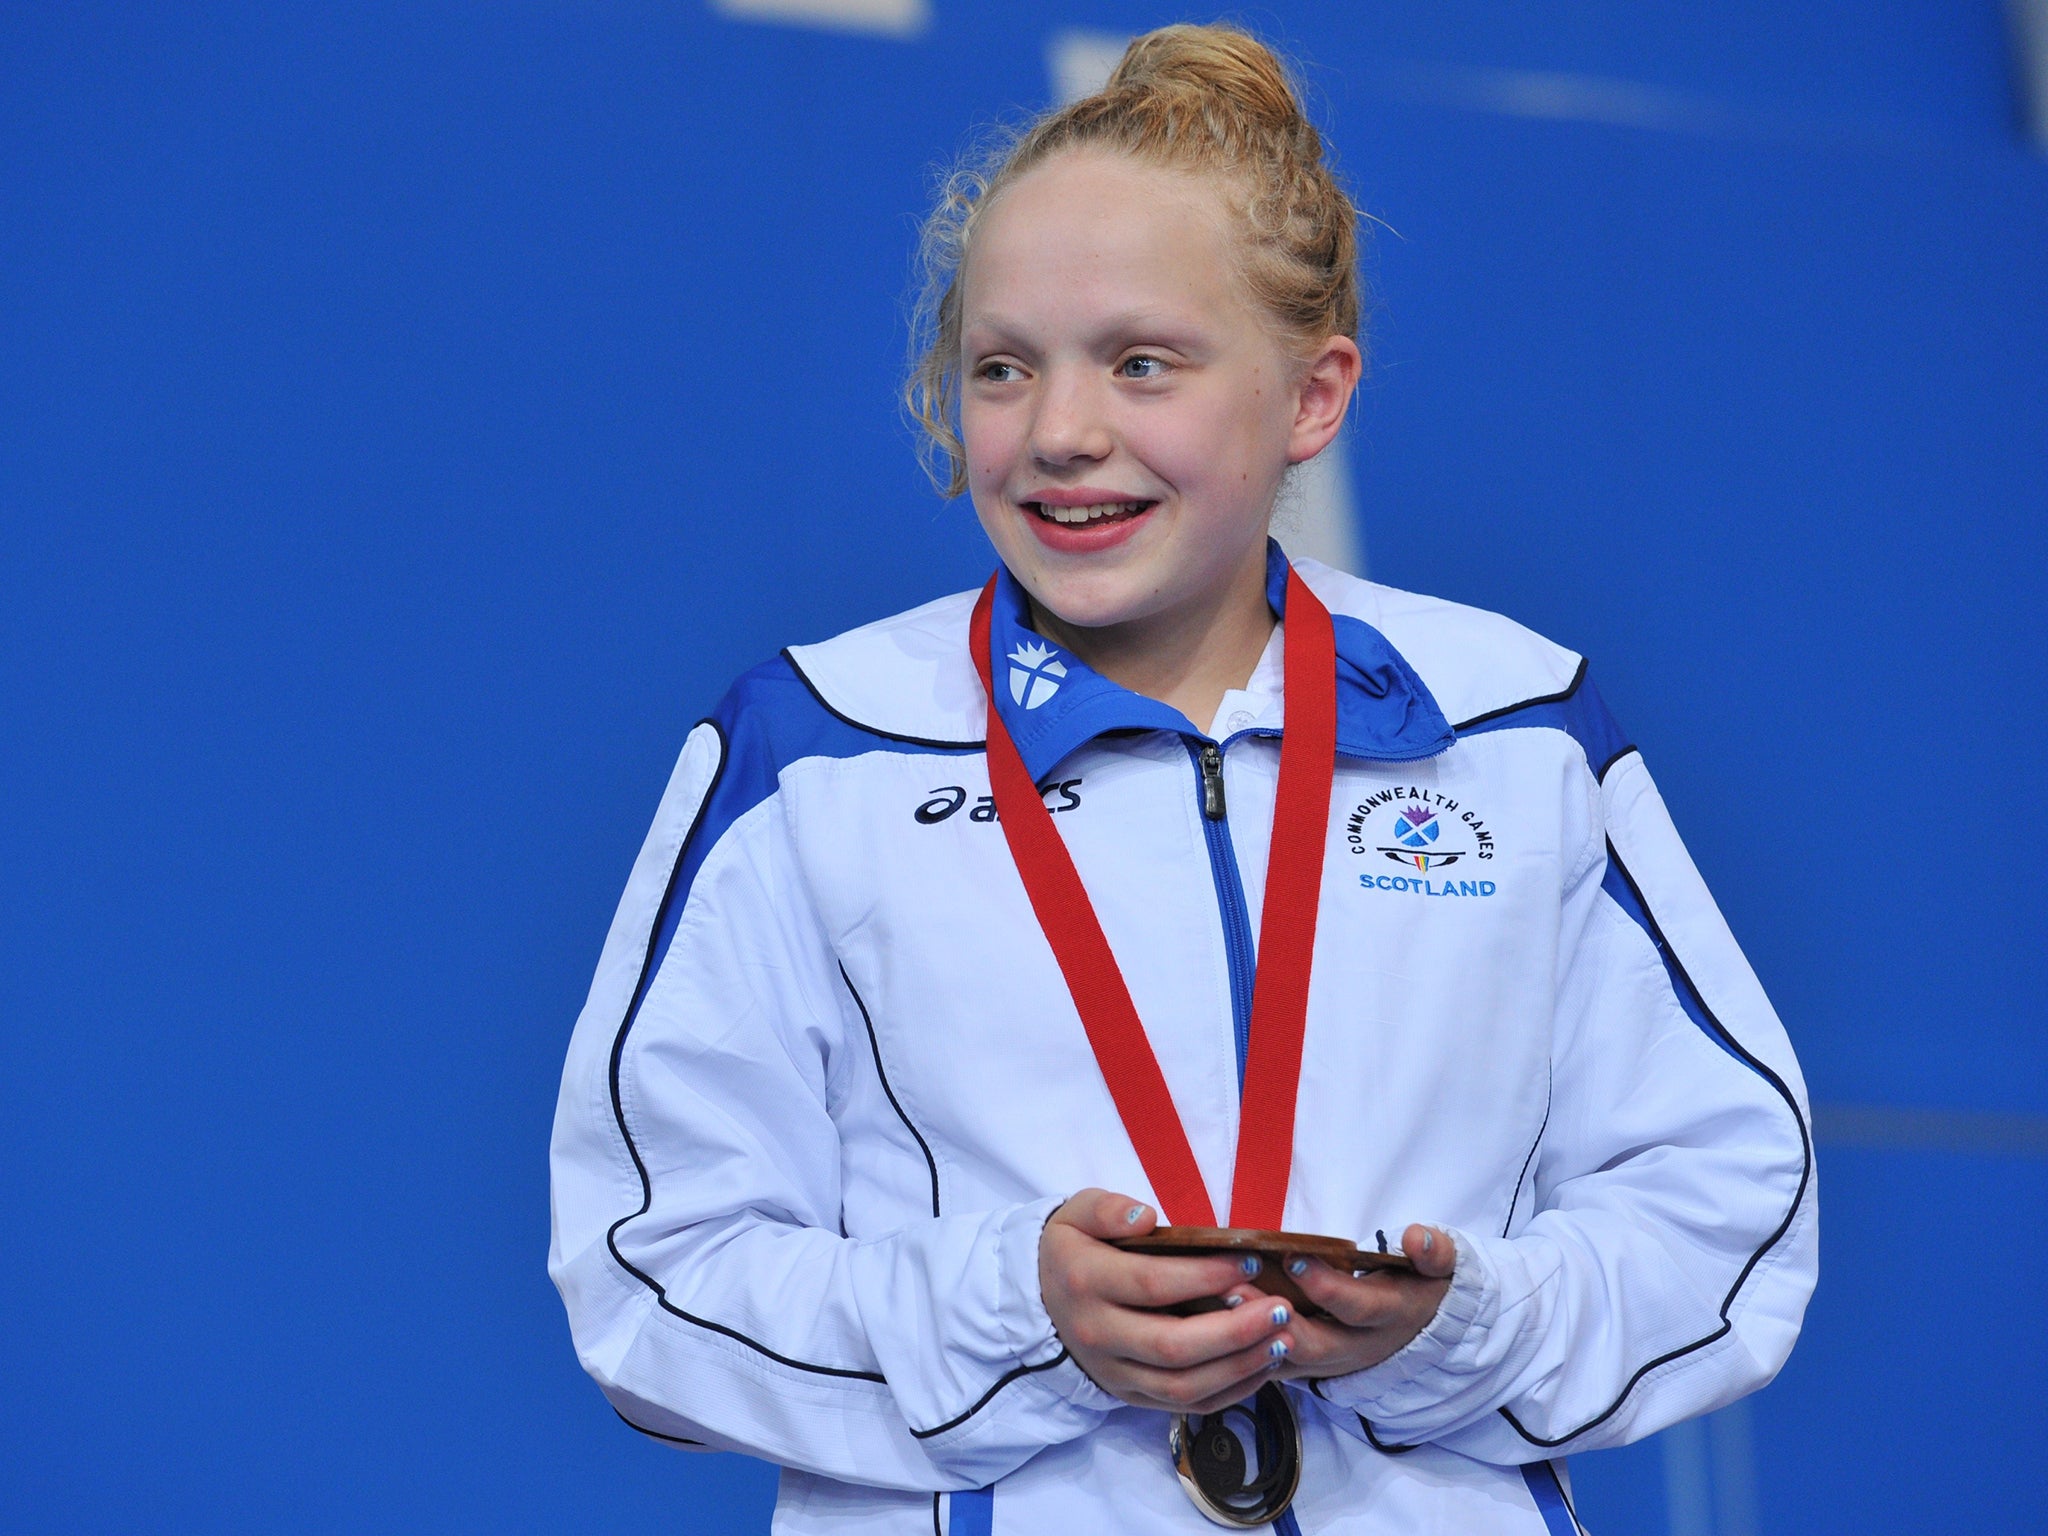 13-year-old Erraid Davies with her bronze medal at the Commonwealth Games